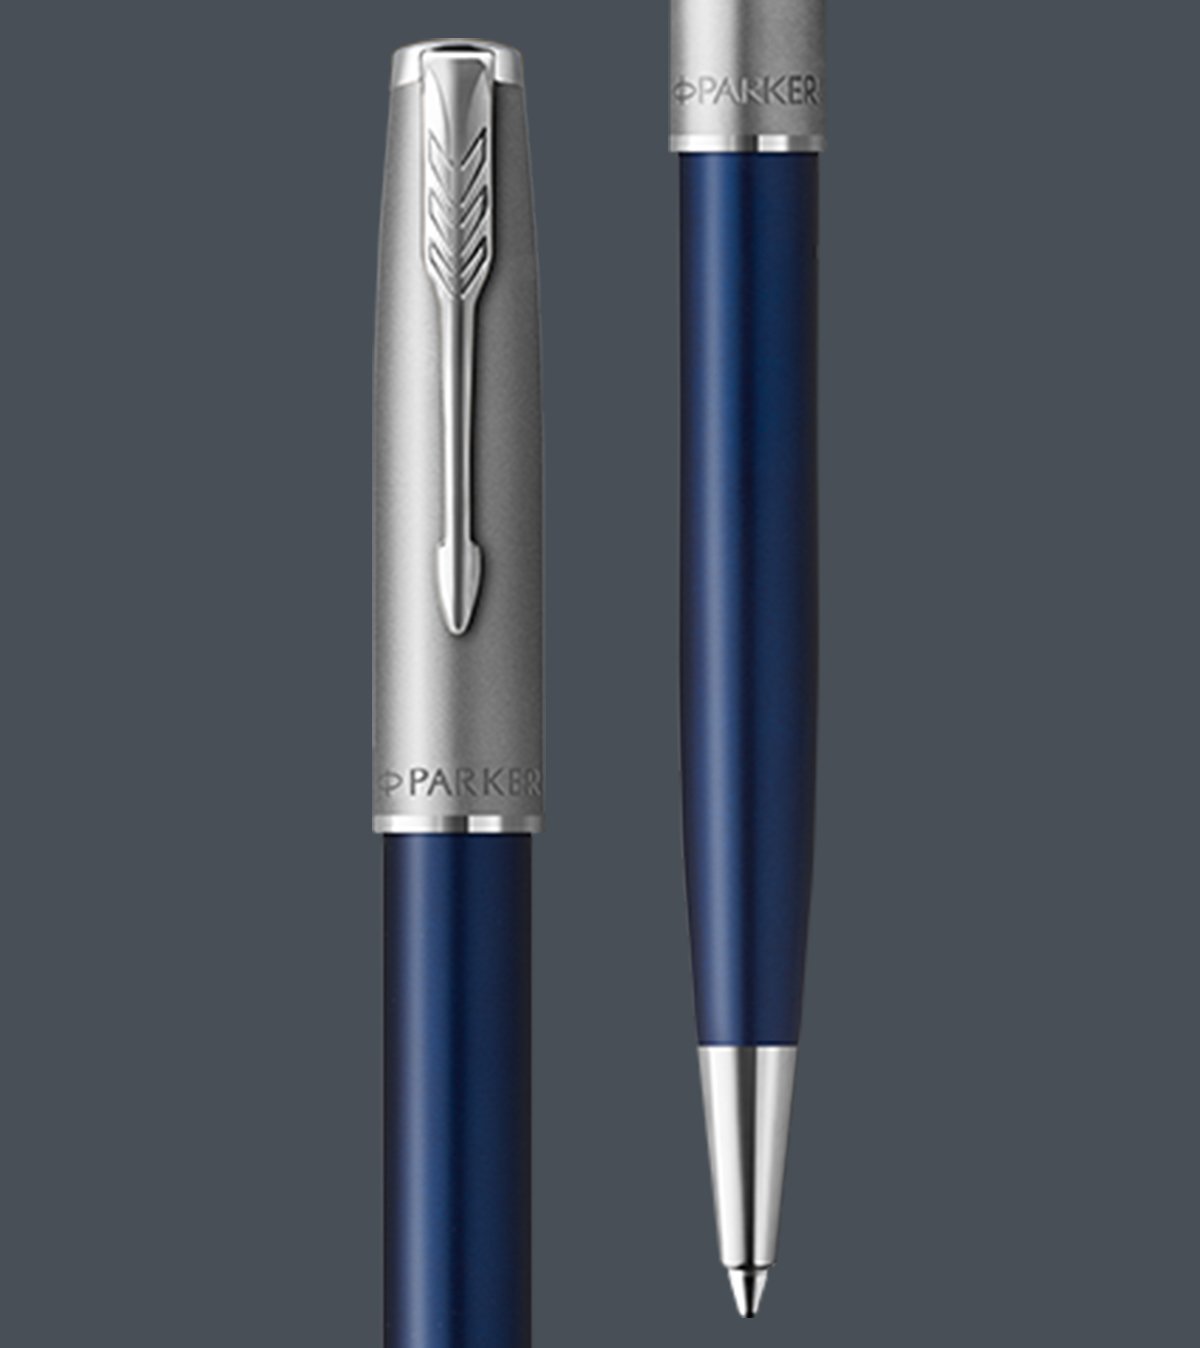 Two upright Sonnet ballpoint pens with chrome trim.